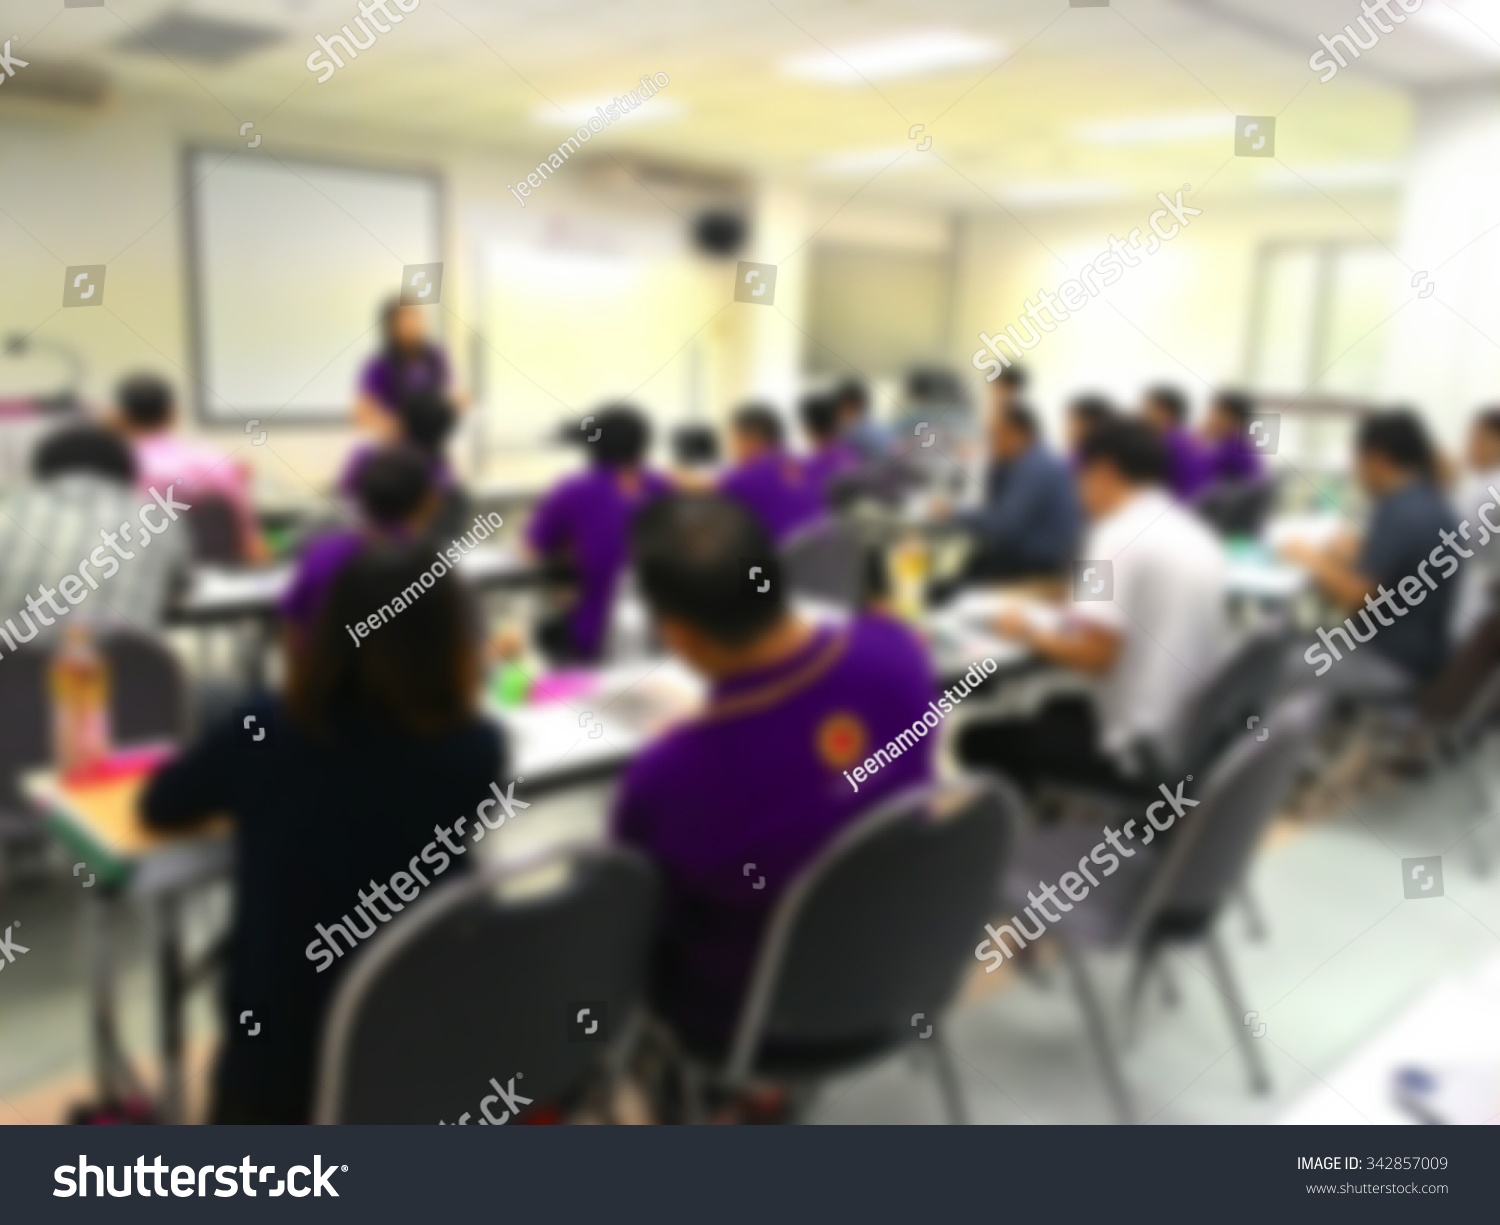 Blur behind student or collegian study lecture in classroom with notebook and screen projector in bachelor or master or Ph.D. degree in university college or business seminar or business meeting
 #342857009